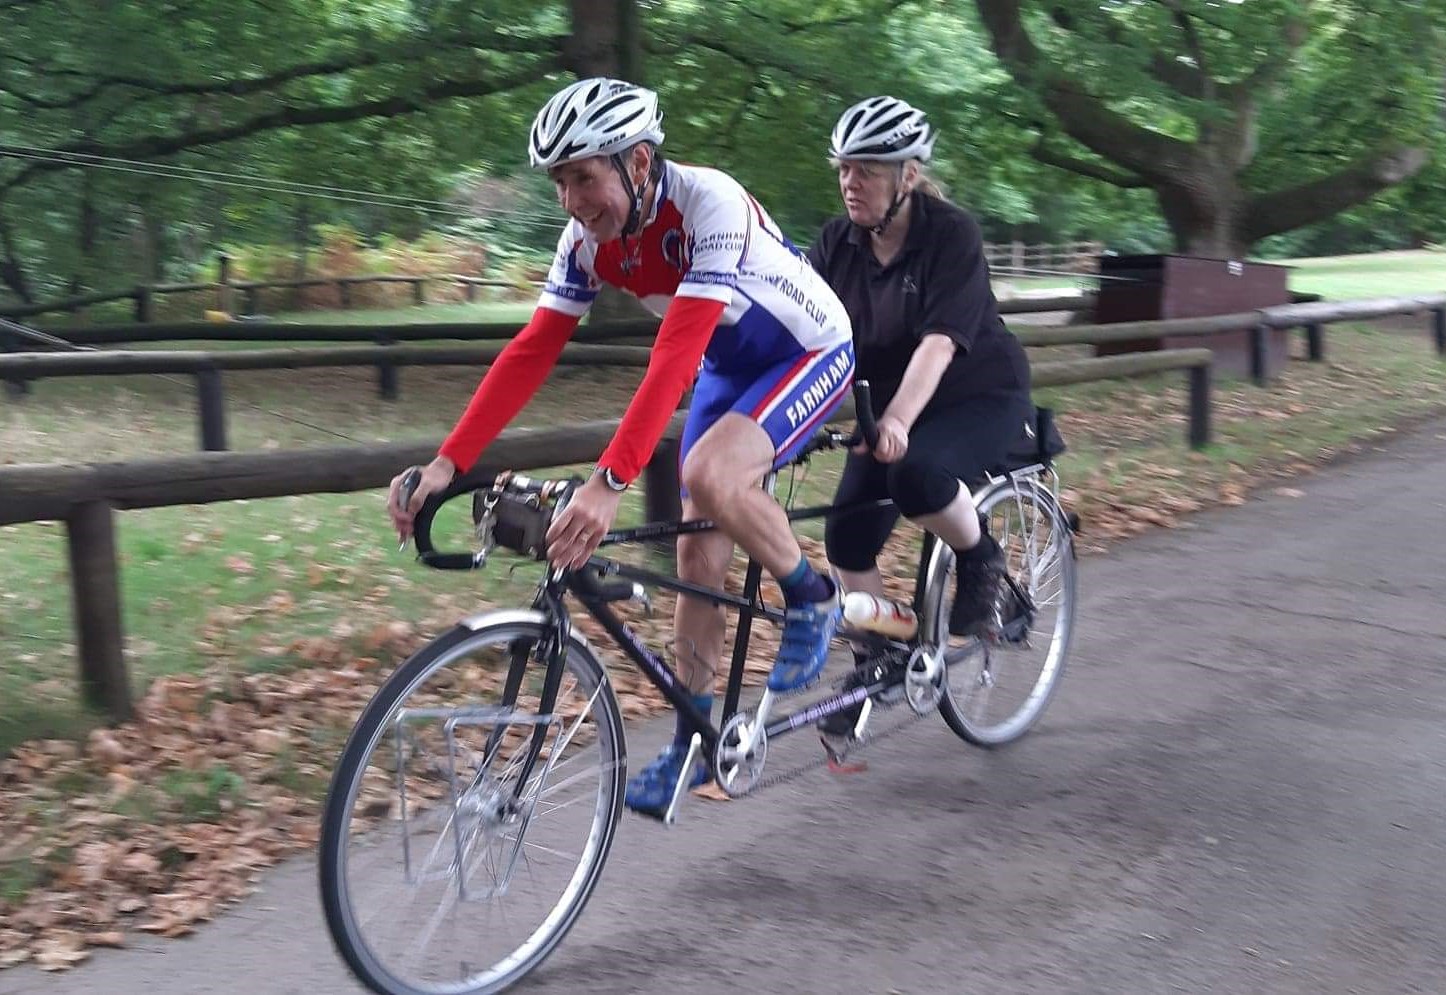 Photograph: Farnham Road Cycling Club very kindly helped us out during the 2022 camp by taking people out on a tandem cycle ride.